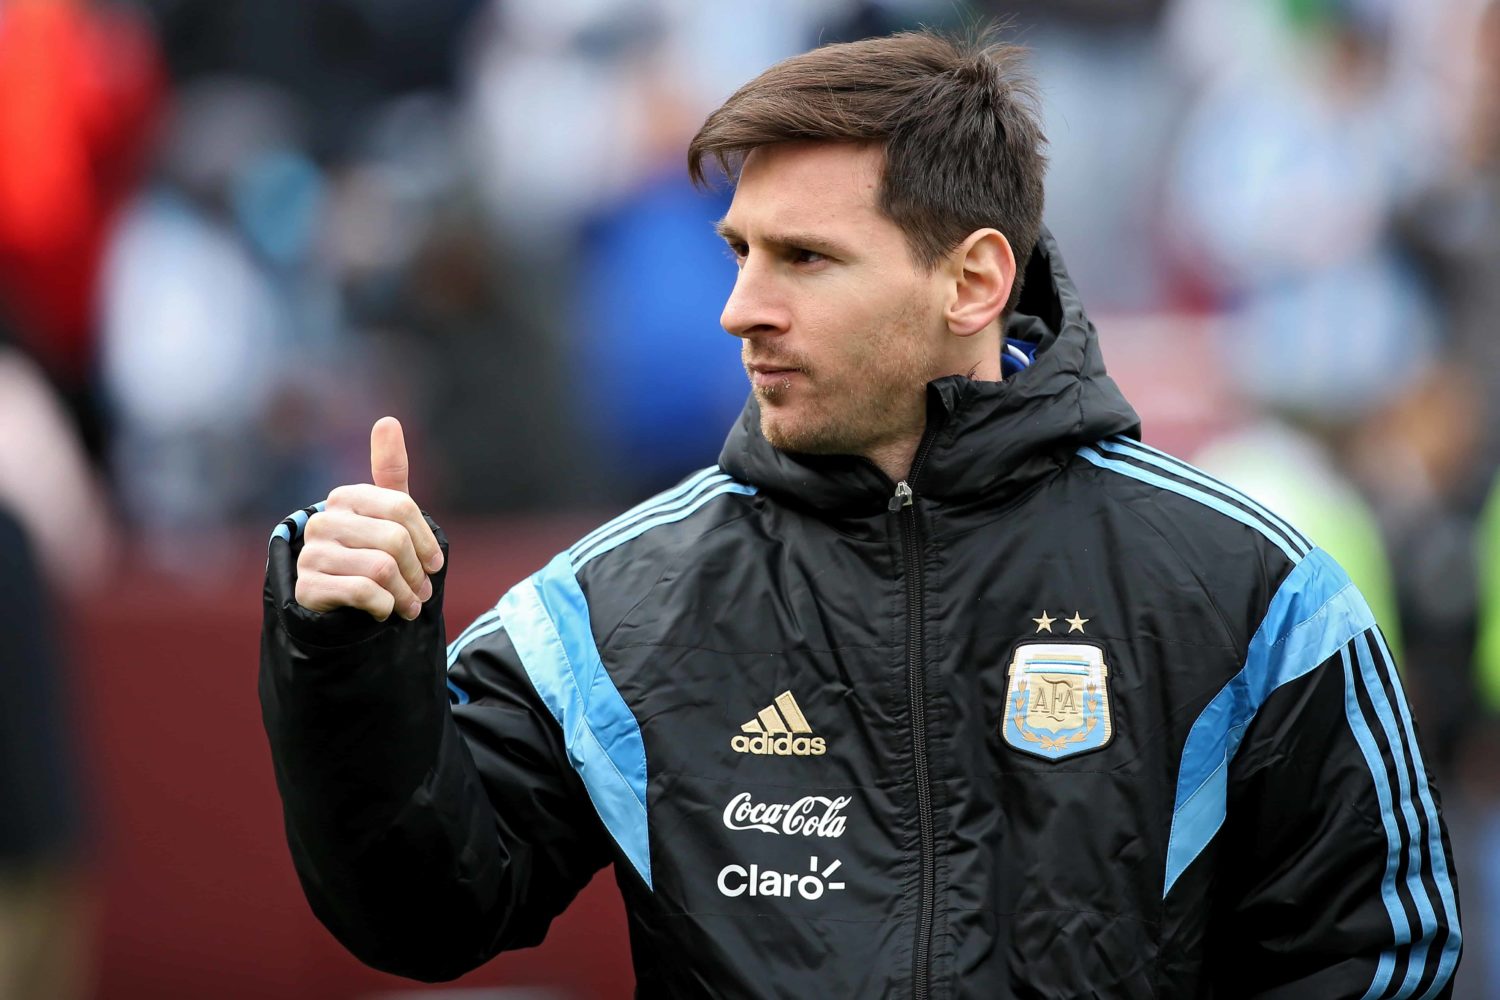 Argentina's Lionel Messi acknowledges the crowd before his team plays El Salvador during an International Friendly at FedExField on March 28, 2015 in Landover, Maryland.